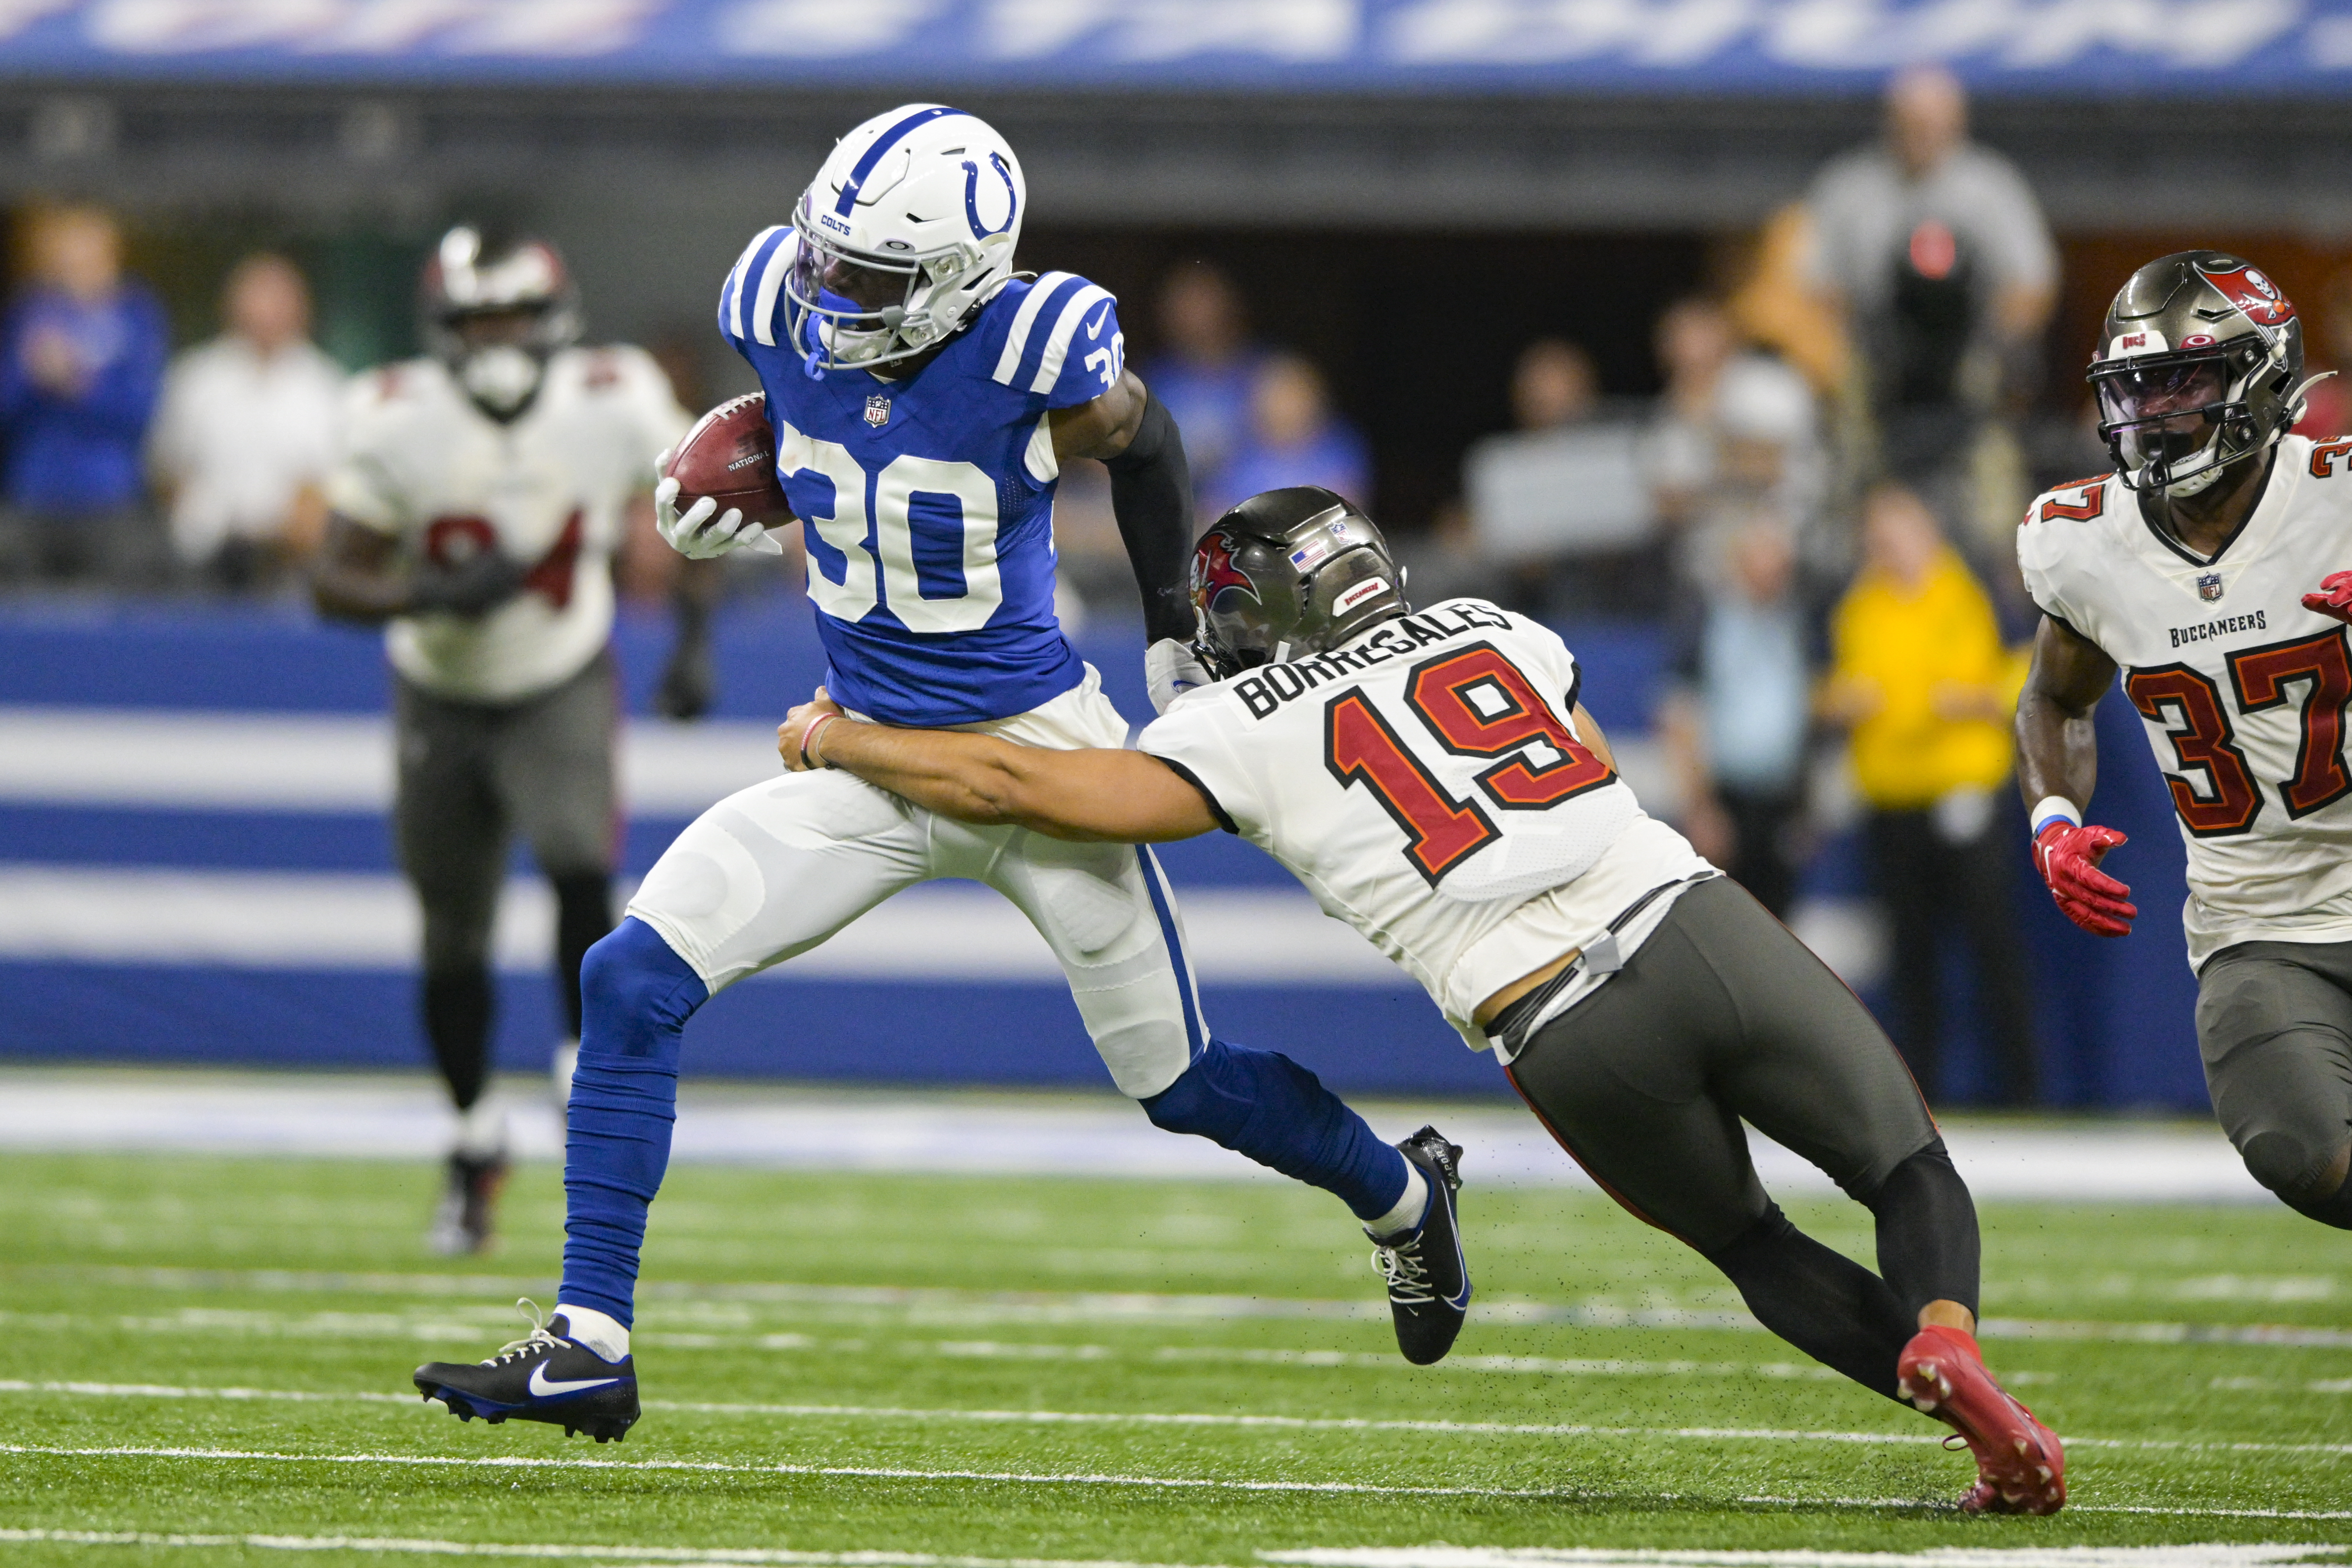 Colts backups rally in preseason finale to beat Buccaneers 27-10